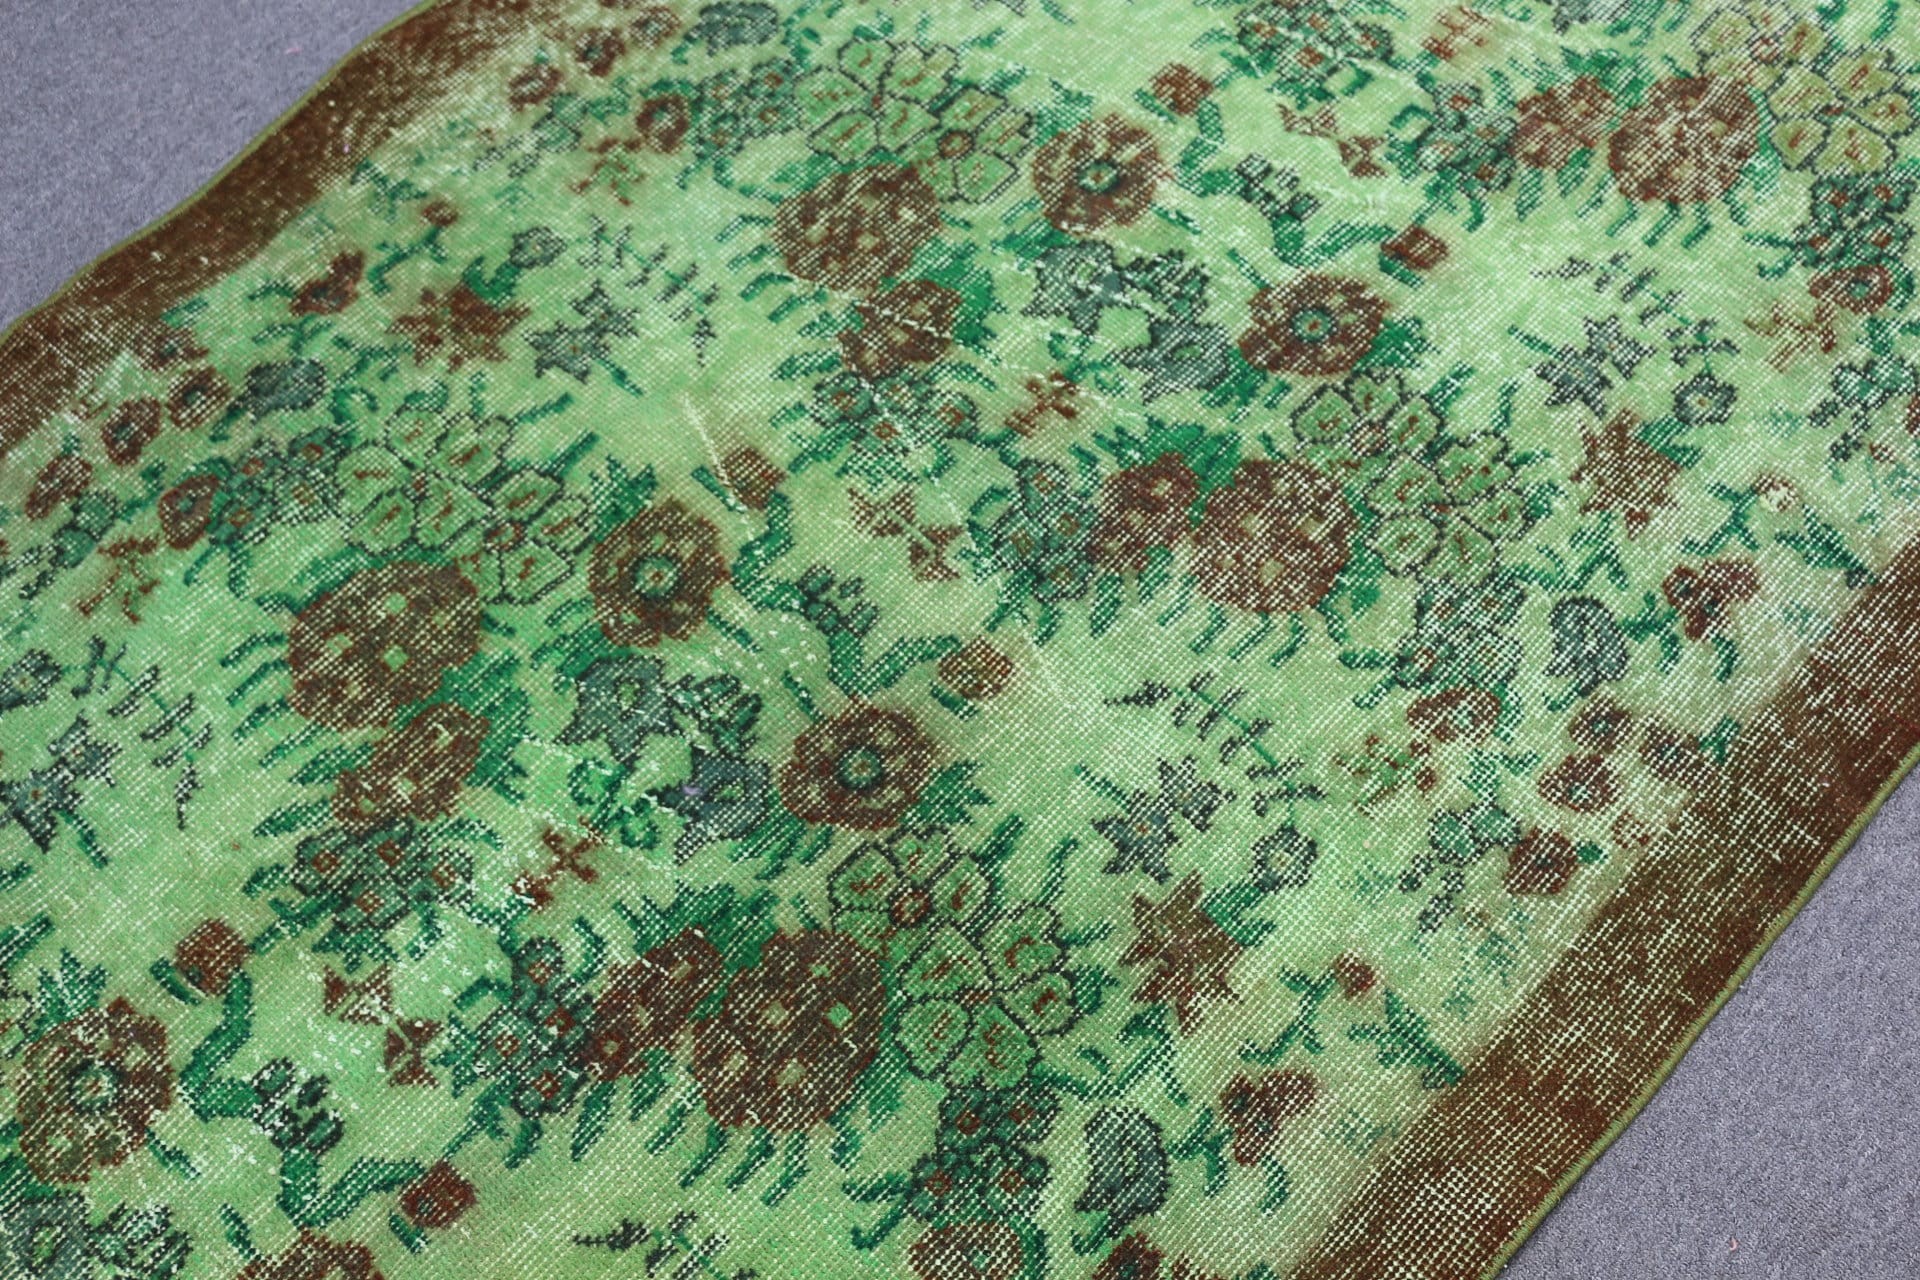 Vintage Rug, Rugs for Nursery, Green  3.6x6.5 ft Accent Rug, Kitchen Rug, Entry Rug, Cool Rug, Turkish Rugs, Moroccan Rug